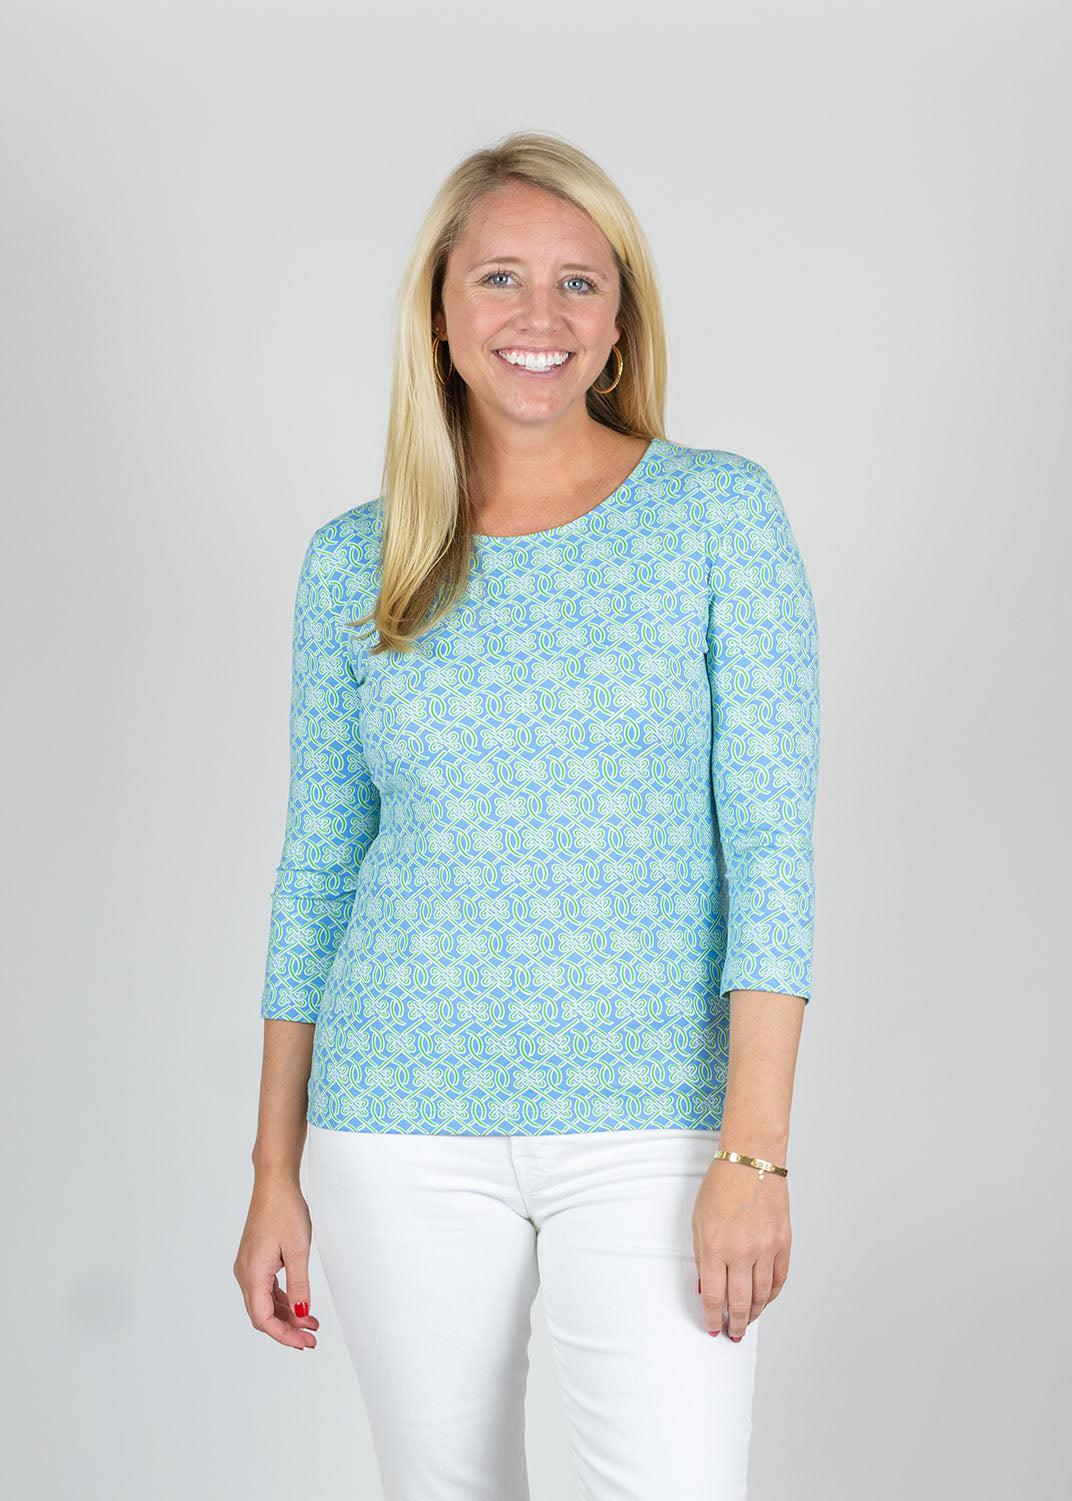 Crew Tee Top - Tie a Knot Blue/Green